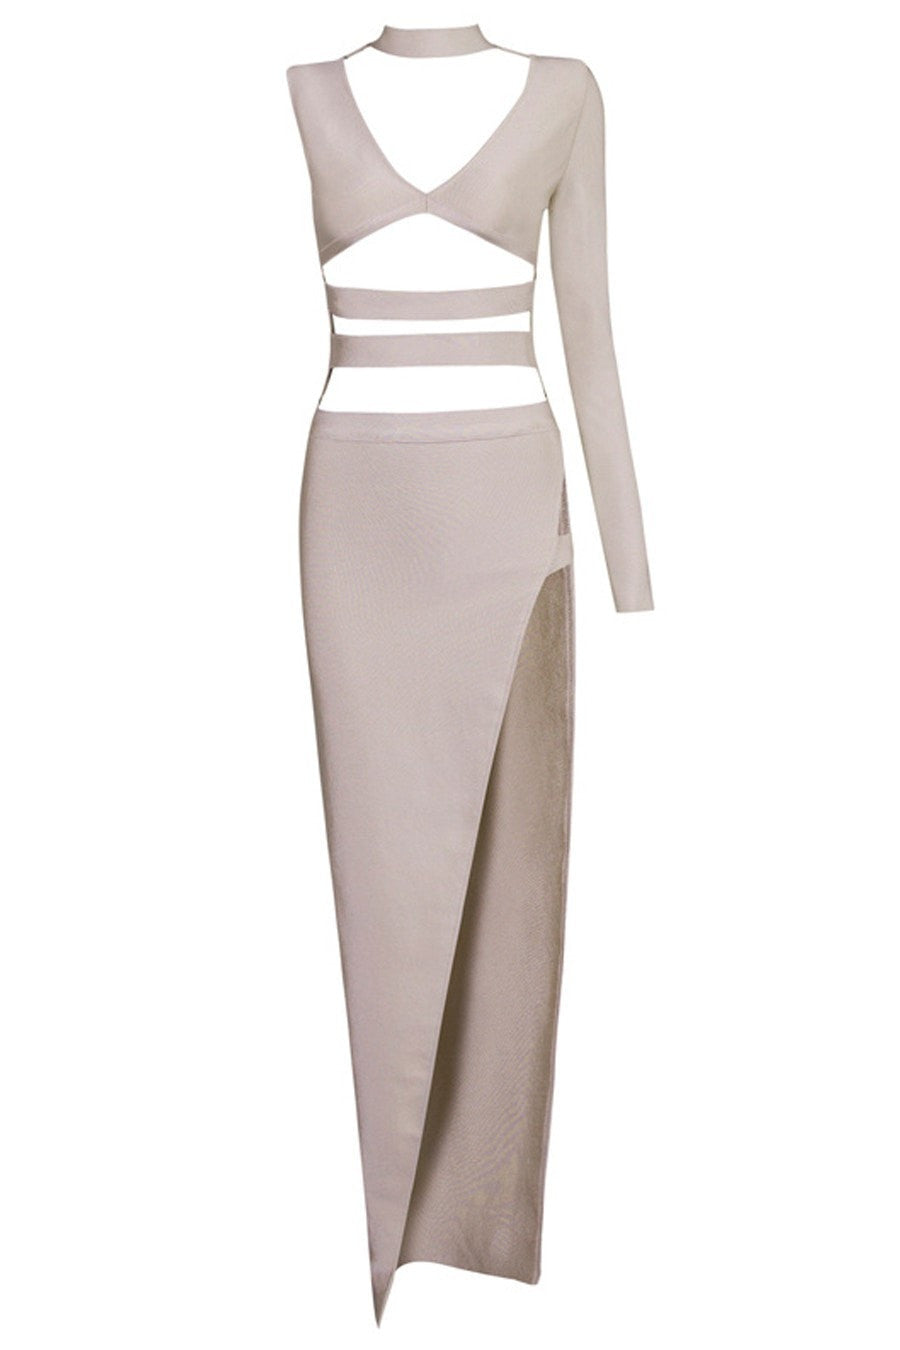 Honey Couture ROYA Taupe Silver Cut Out Bandage Maxi Dress Honey Couture$ AfterPay Humm ZipPay LayBuy Sezzle